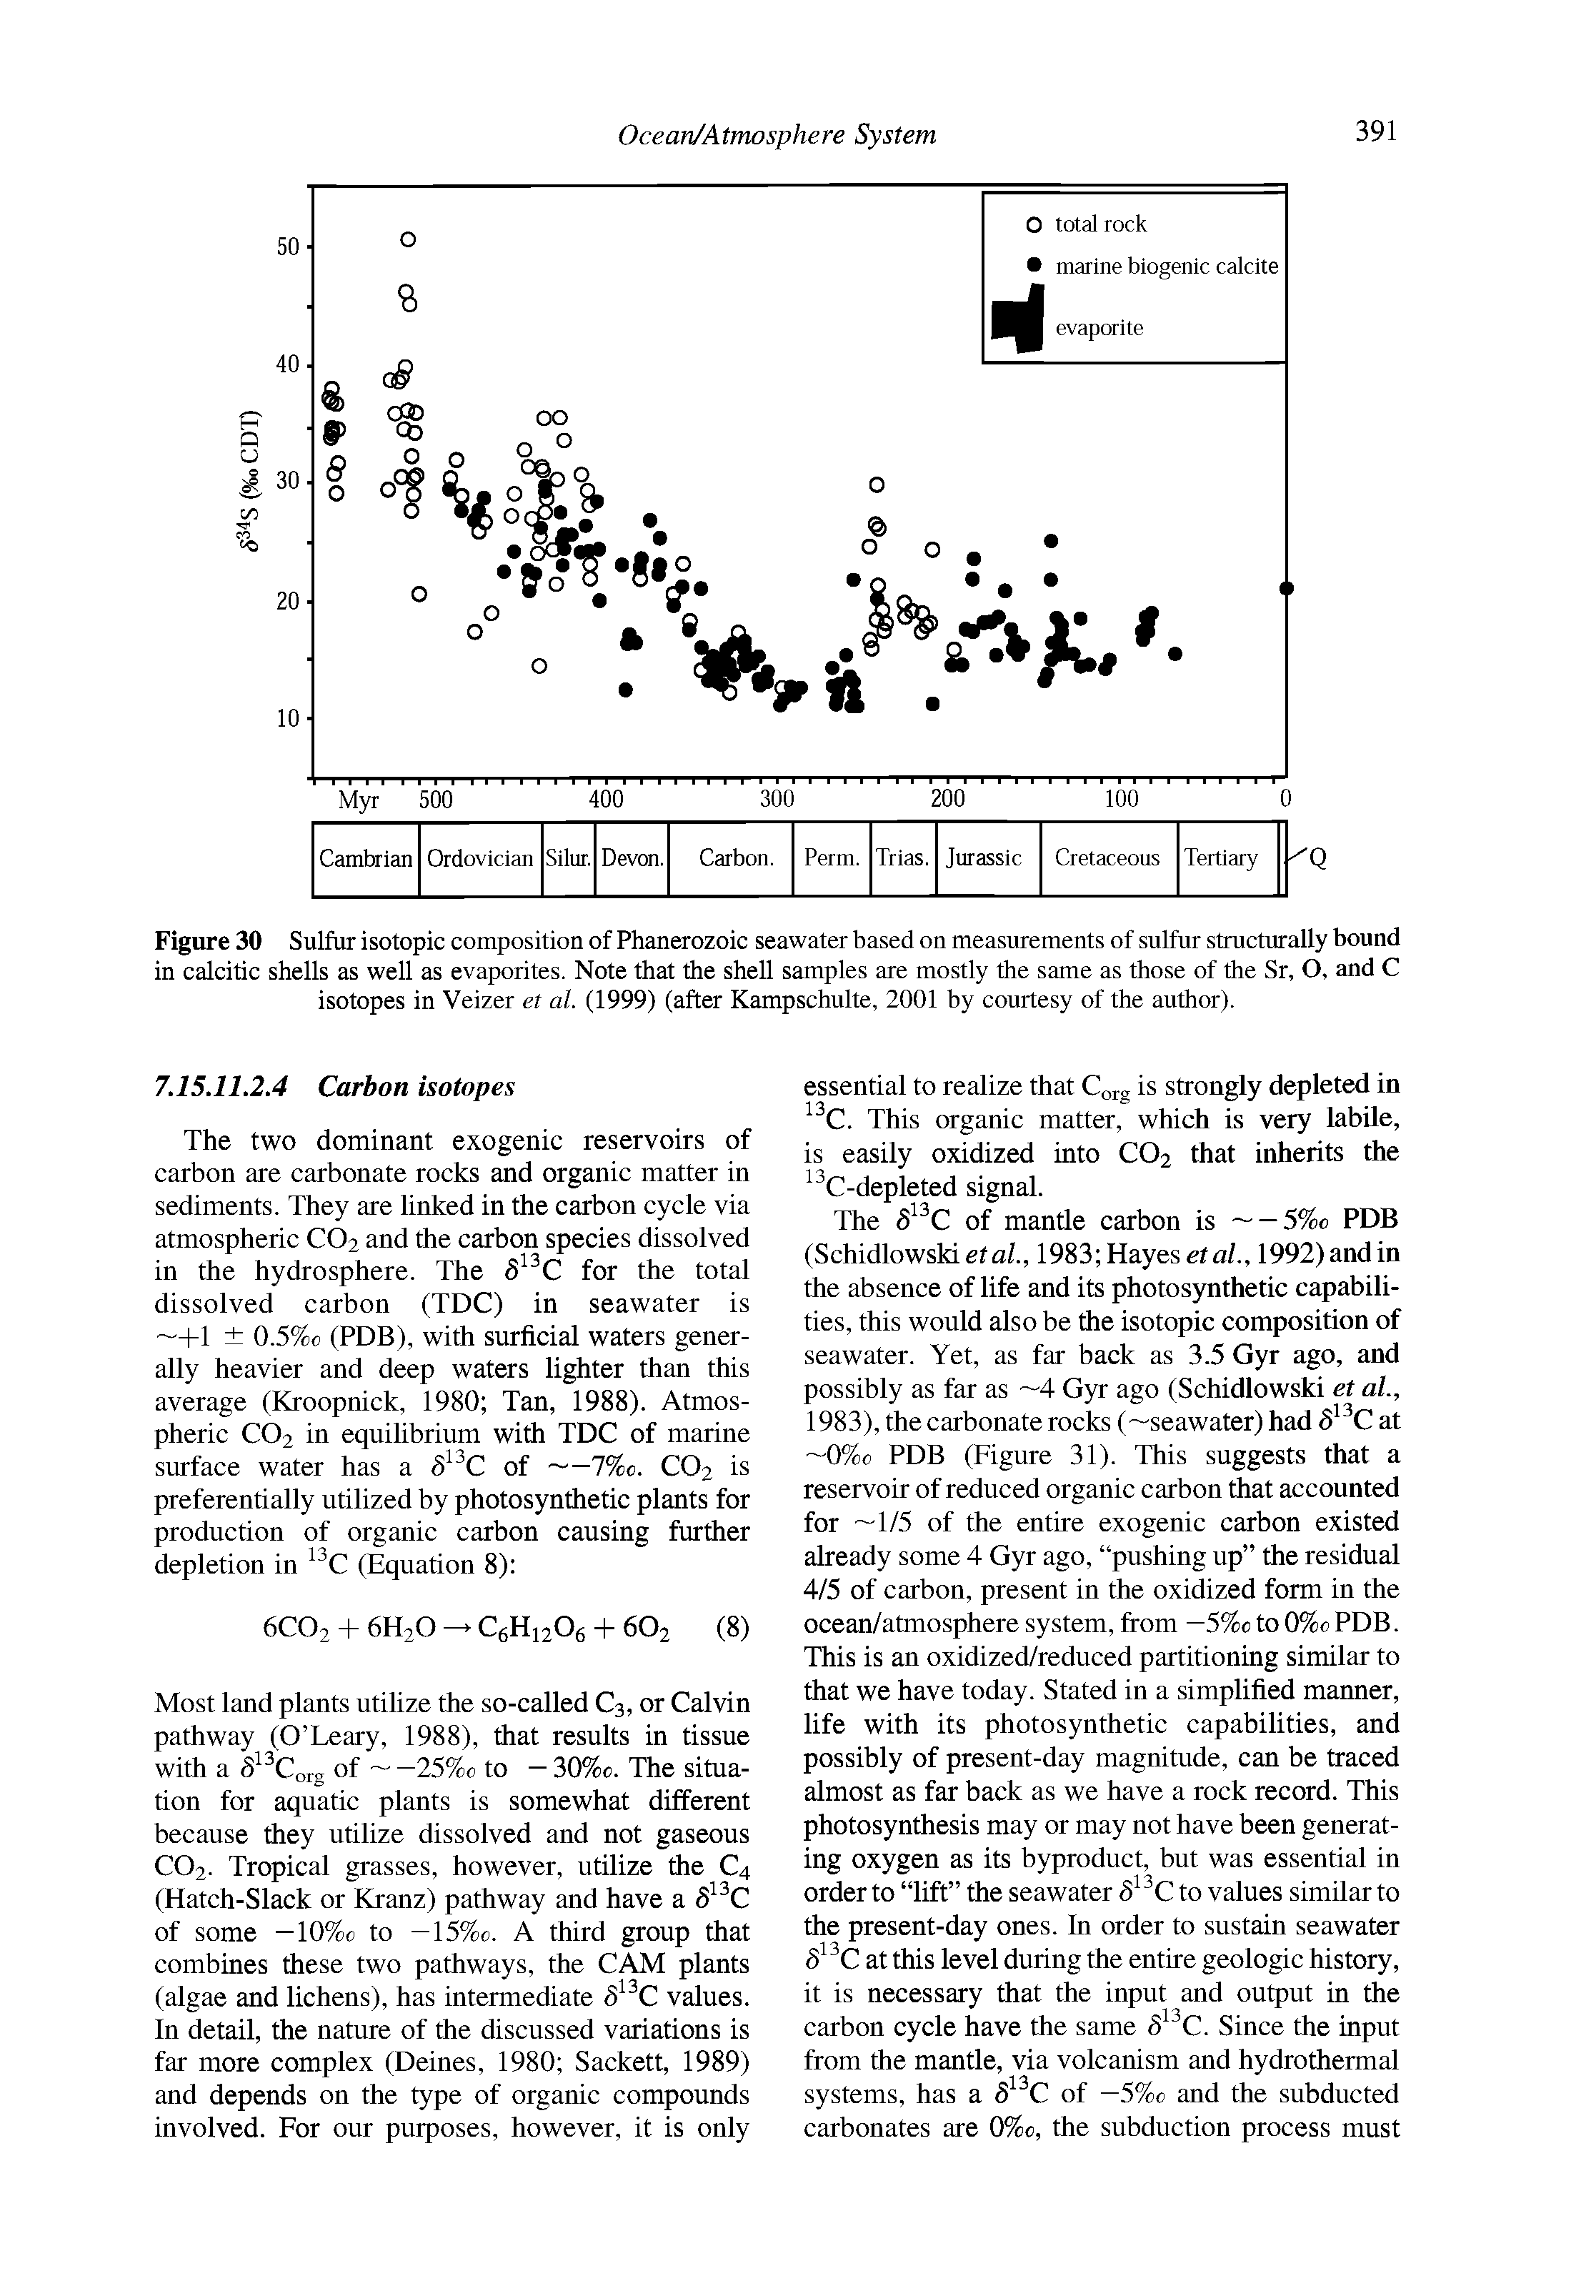 Figure 30 Sulfur isotopic composition of Phanerozoic seawater based on measurements of sulfur structurally bound in calcitic shells as well as evaporites. Note that the shell samples are mostly the same as those of the Sr, O, and C isotopes in Veizer et al. (1999) (after Kampschulte, 2001 by courtesy of the author).